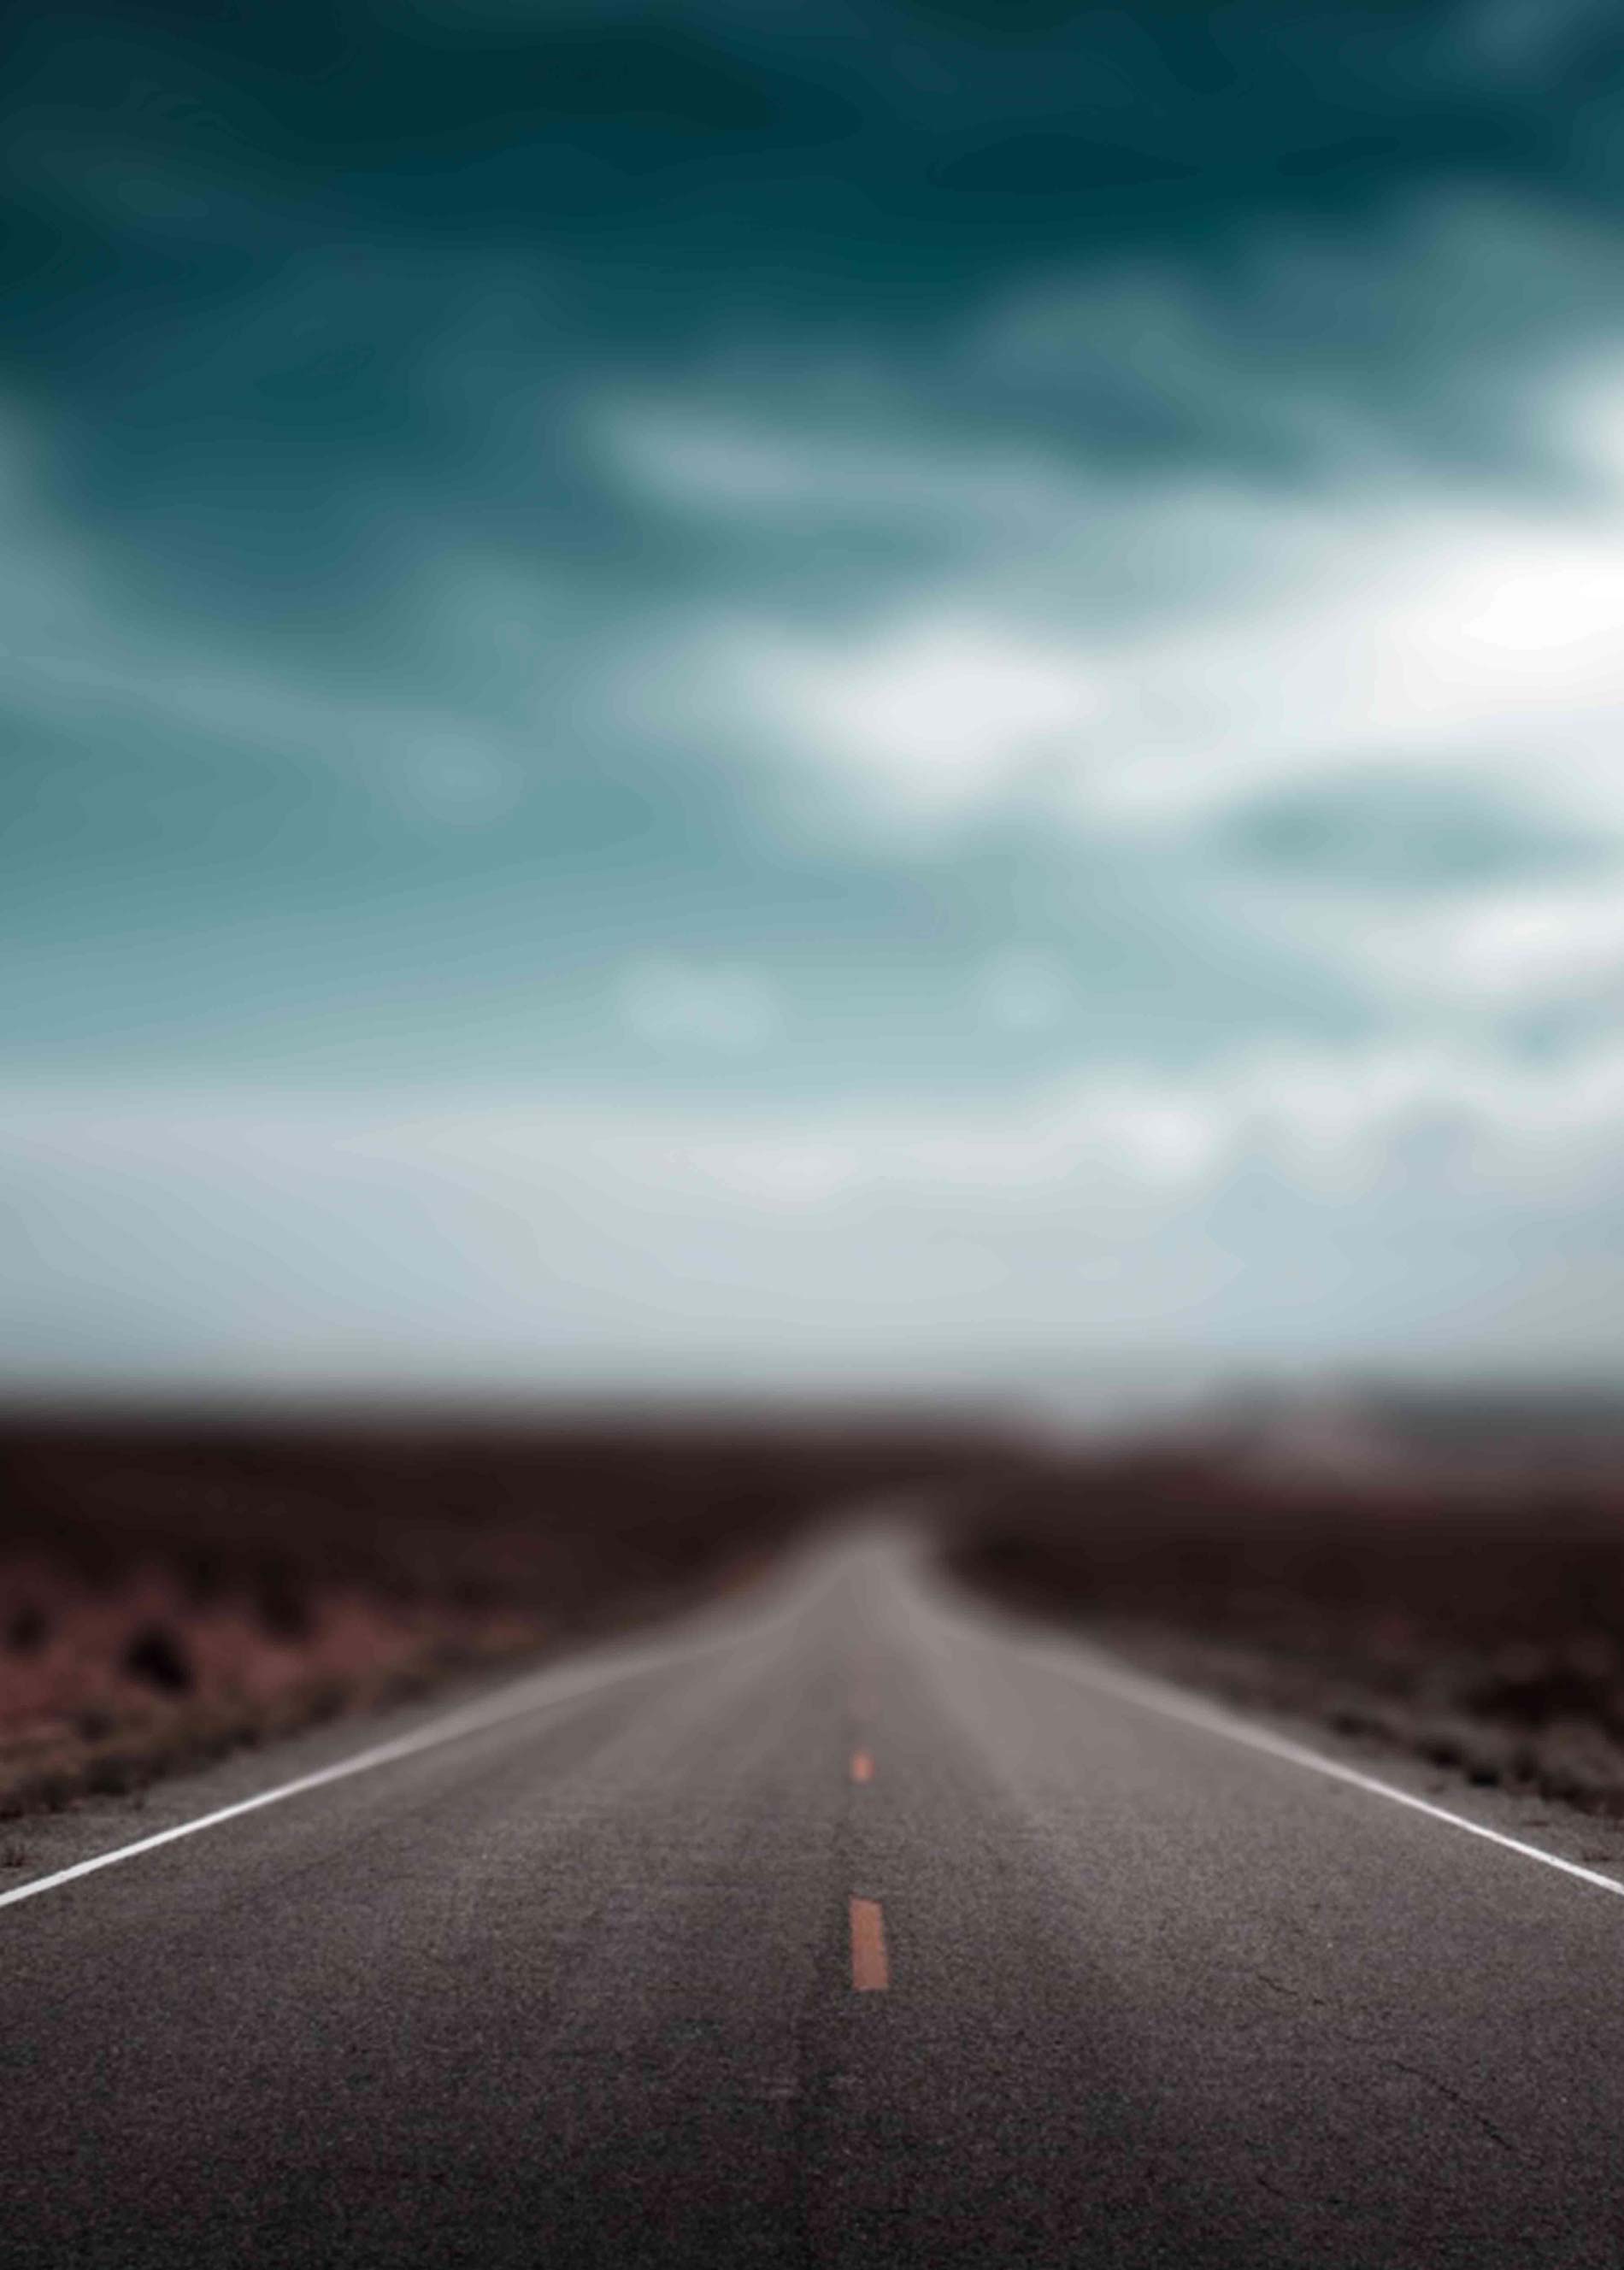 Amazing Background Sky Road Images For Your Design Projects